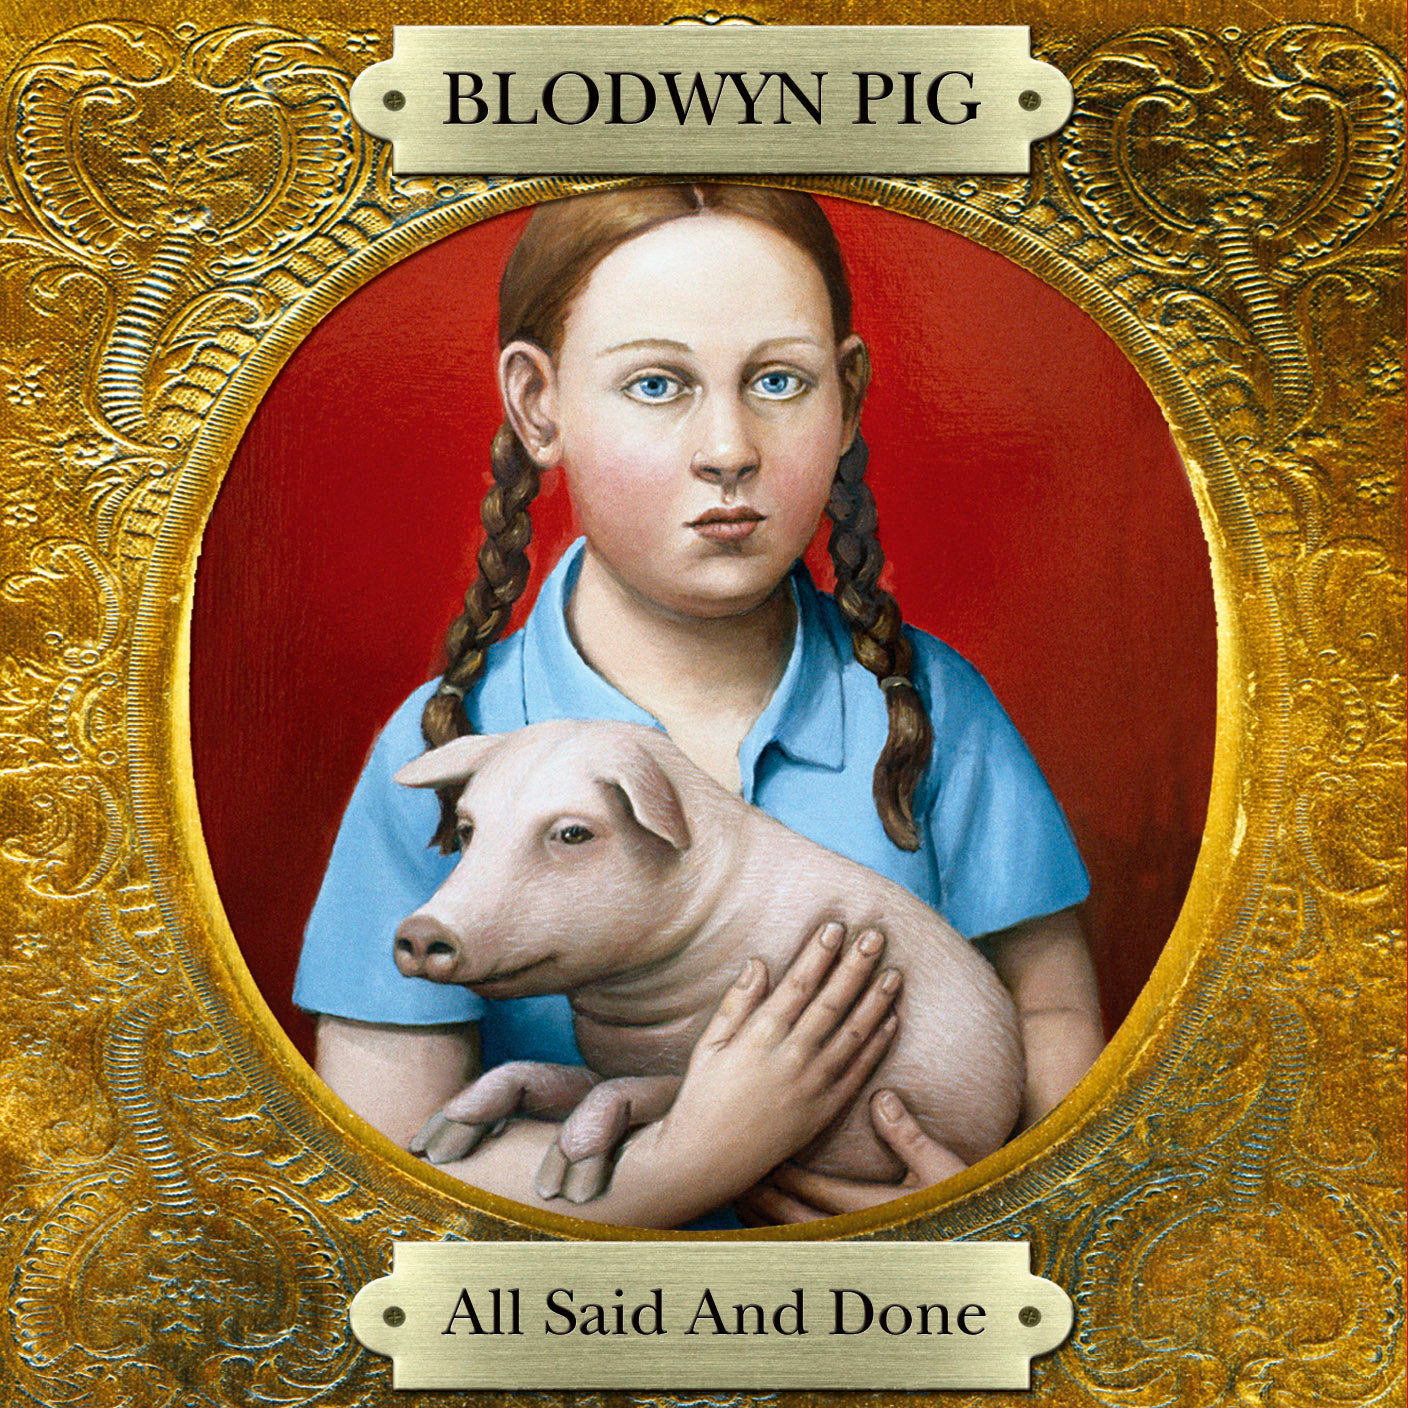 Blodwyn Pig - All Said And Done - 2CD Album - Secret Records Limited